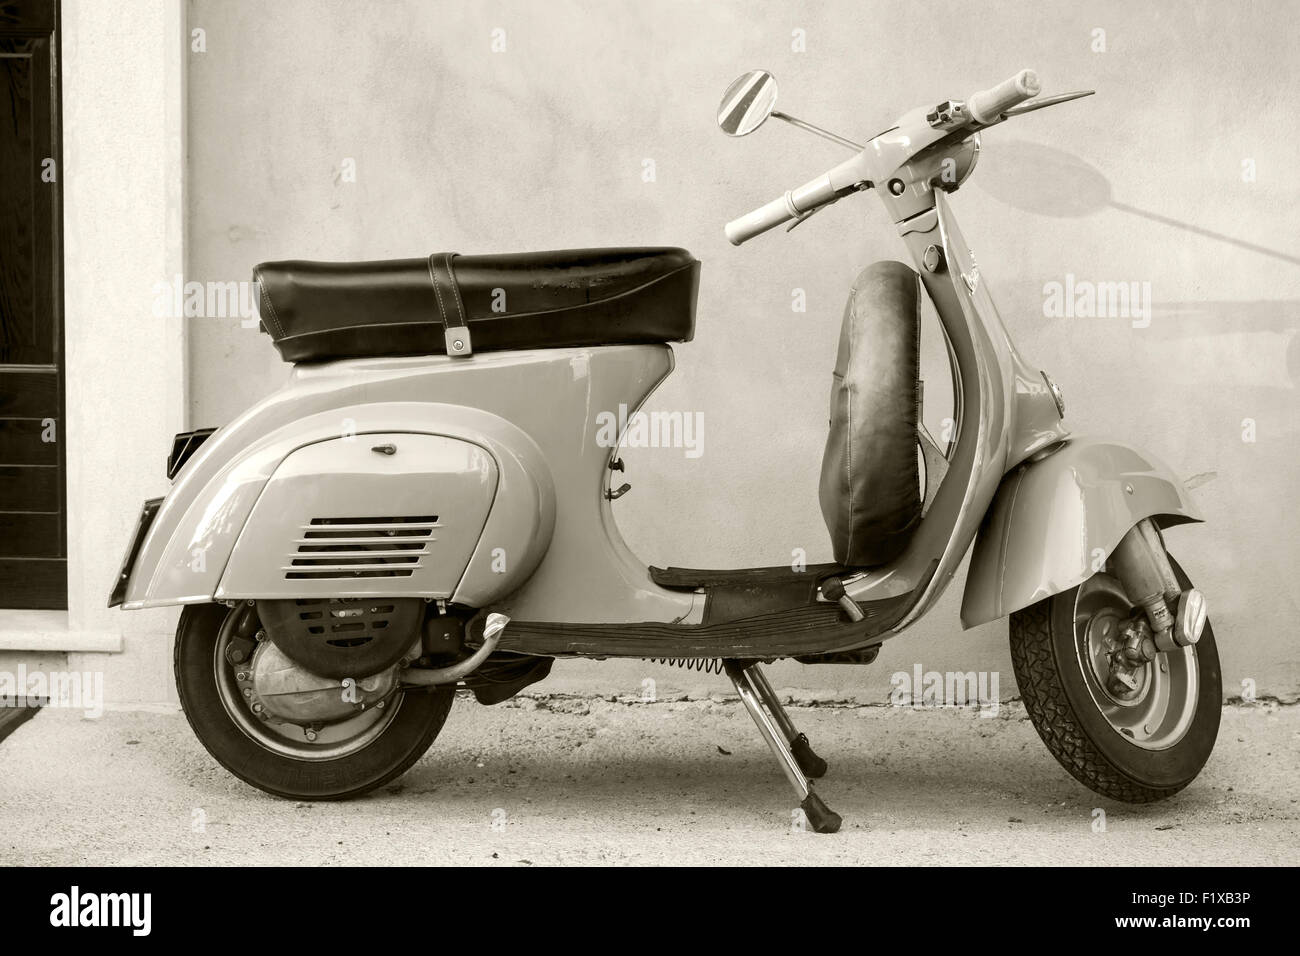 Gaeta, Italy - August 19, 2015: Classic Vespa scooter stands parked near the wall Stock Photo